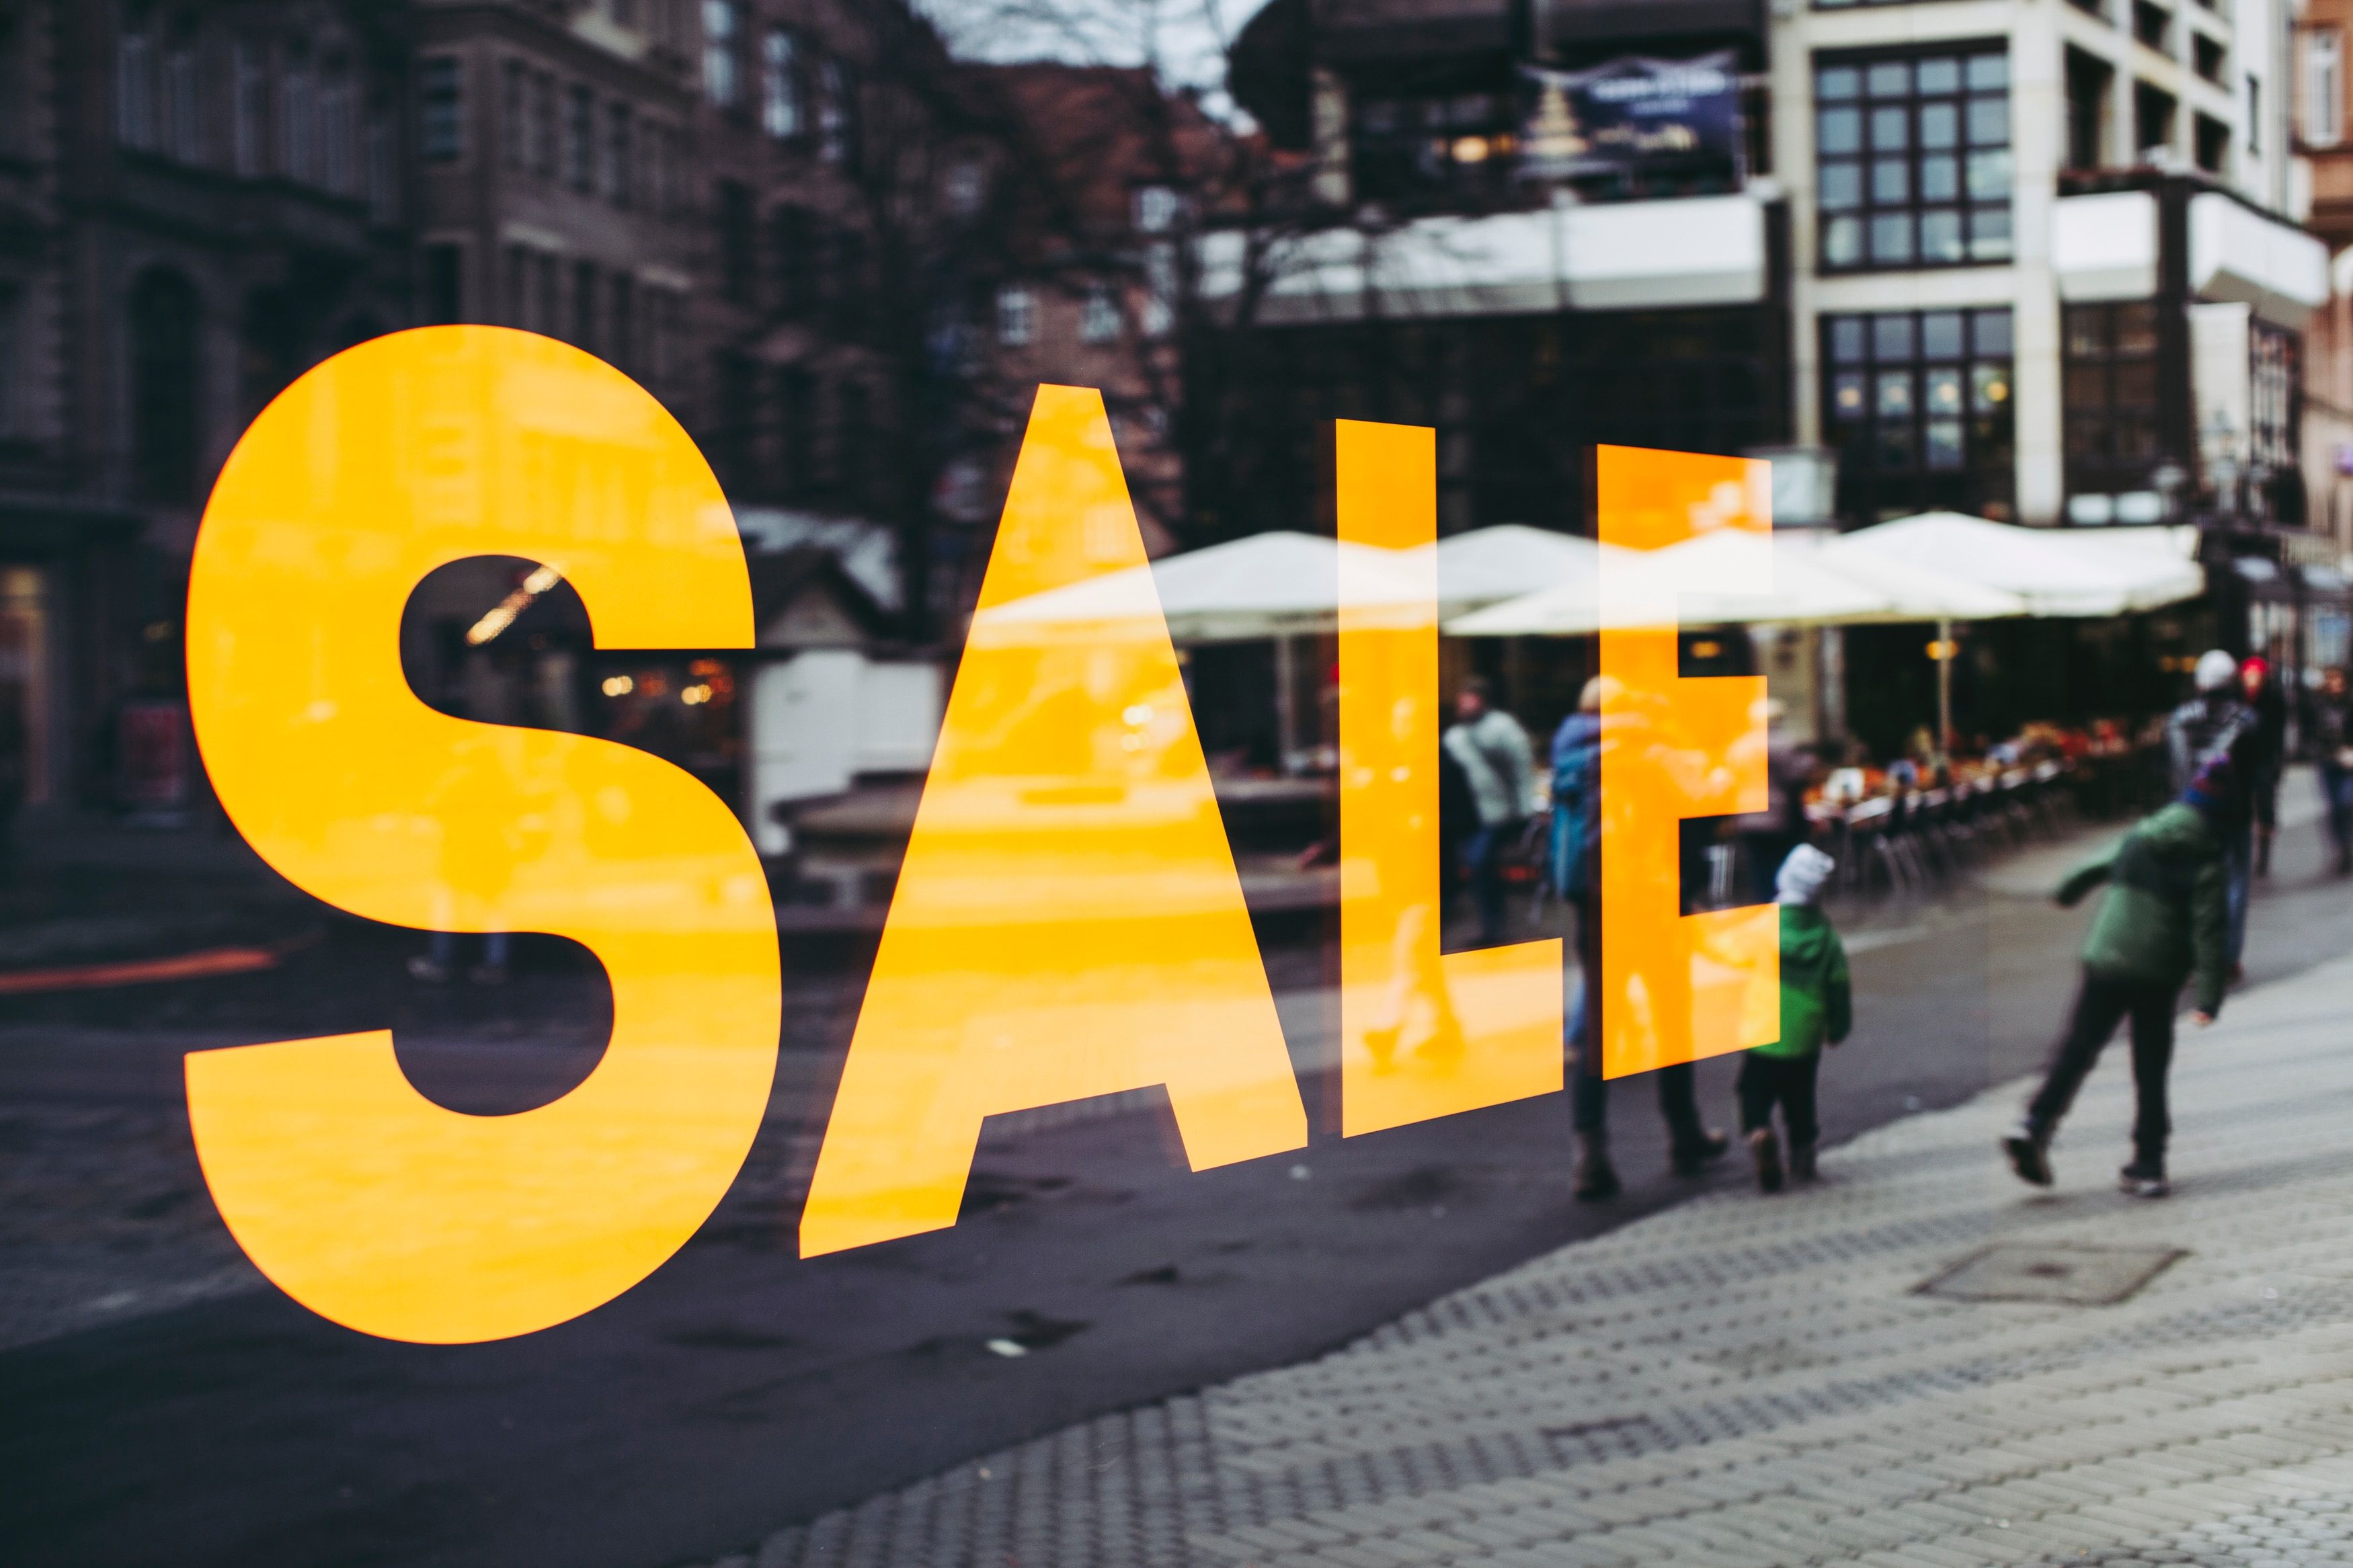 Top 5 post-Black Friday marketing tips for eCommerce success over the holidays